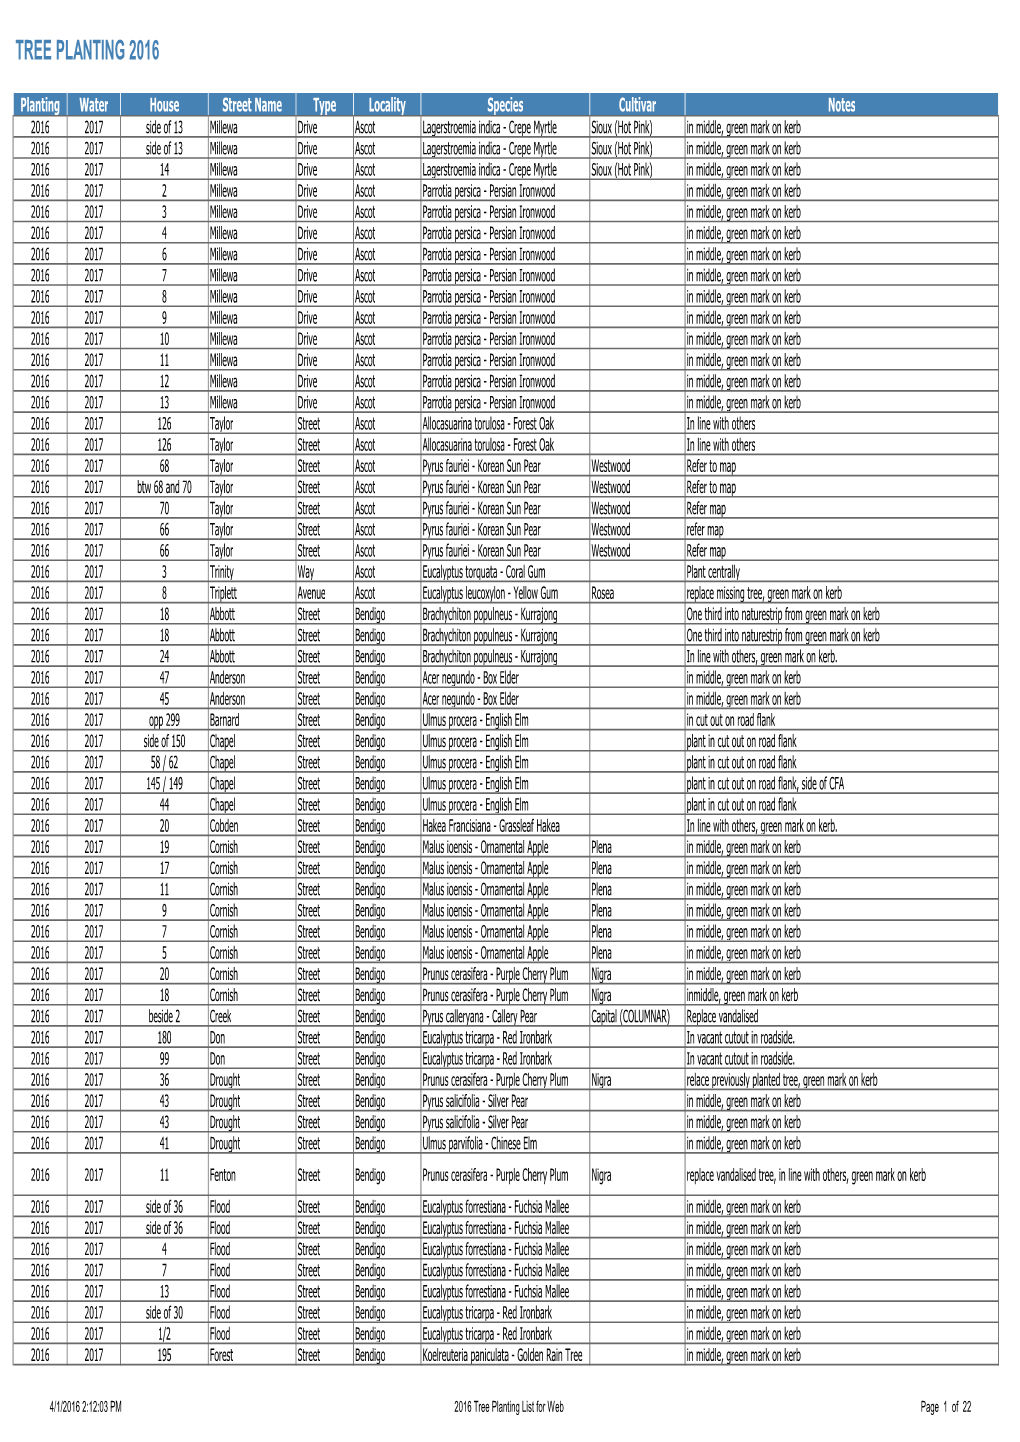 2016 Tree Planting List For